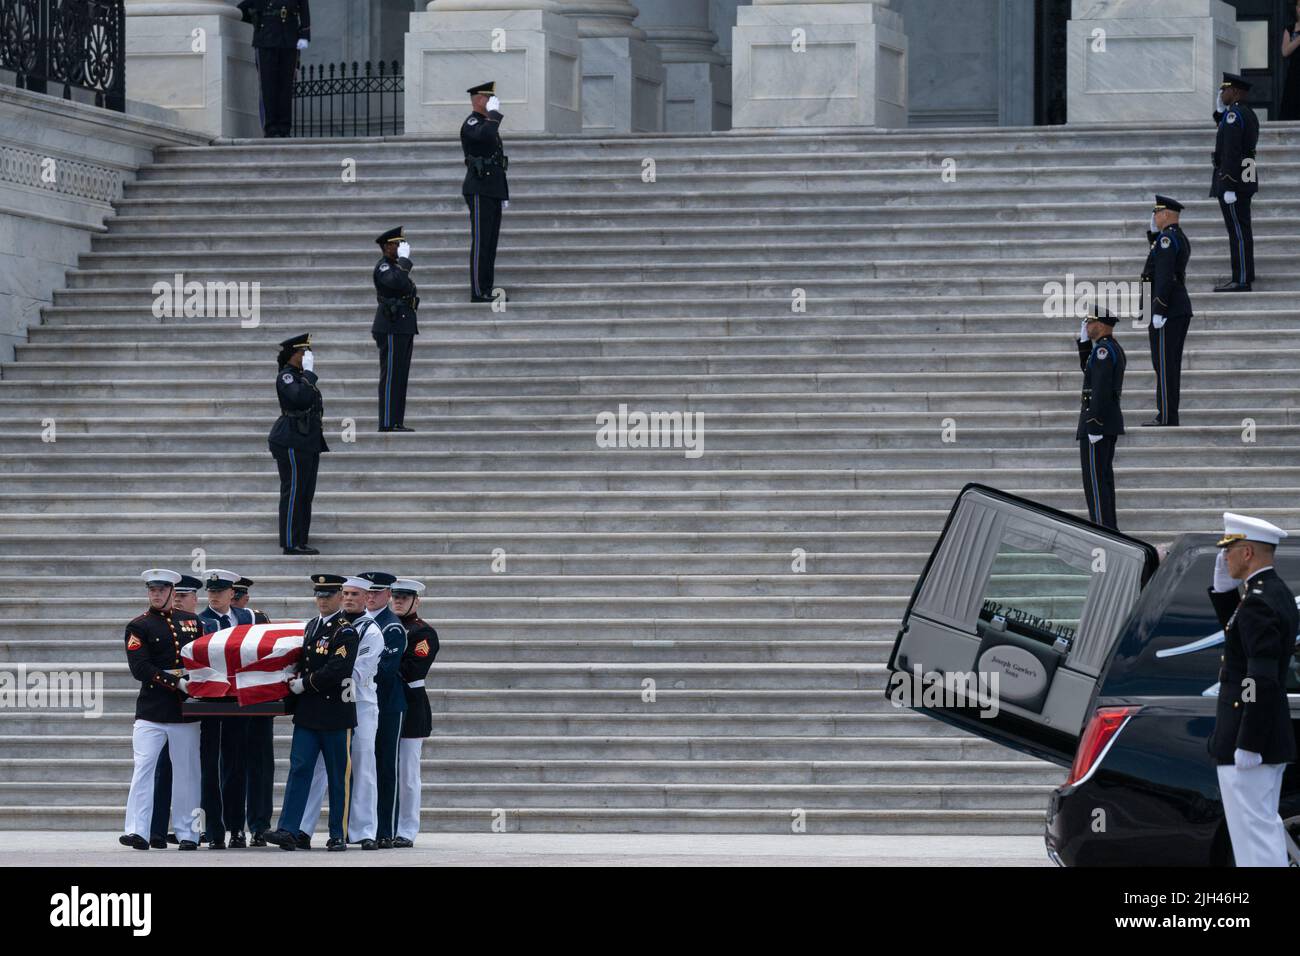 Washington DC, USA. 14th July, 2022. The casket of Marine Chief Warrant Officer 4 Hershel Woodrow “Woody” Williams, the last surviving World War II Medal of Honor recipient, is carried out of the Rotunda of the US Capitol, in Washington, DC, USA, July 14, 2022. The Marine Corps veteran, who died June 29th, was awarded the nation’s highest award for his actions on Iwo Jima. Photo by Eric Lee/Pool/ABACAPRESS.COM Credit: Abaca Press/Alamy Live News Stock Photo